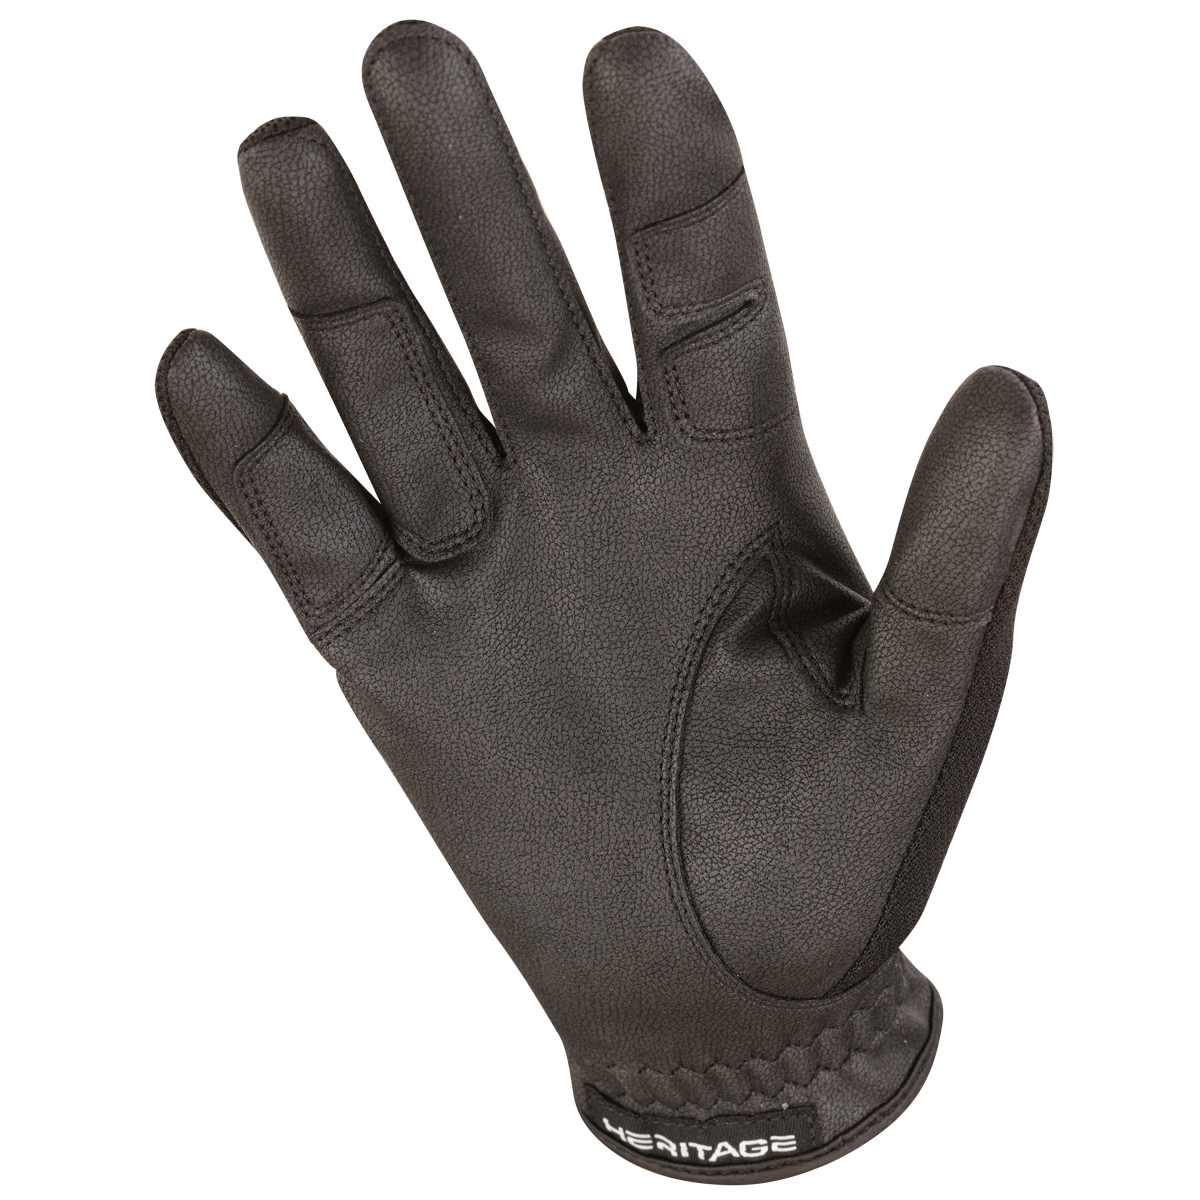 Heritage Cross Country Gloves - Black